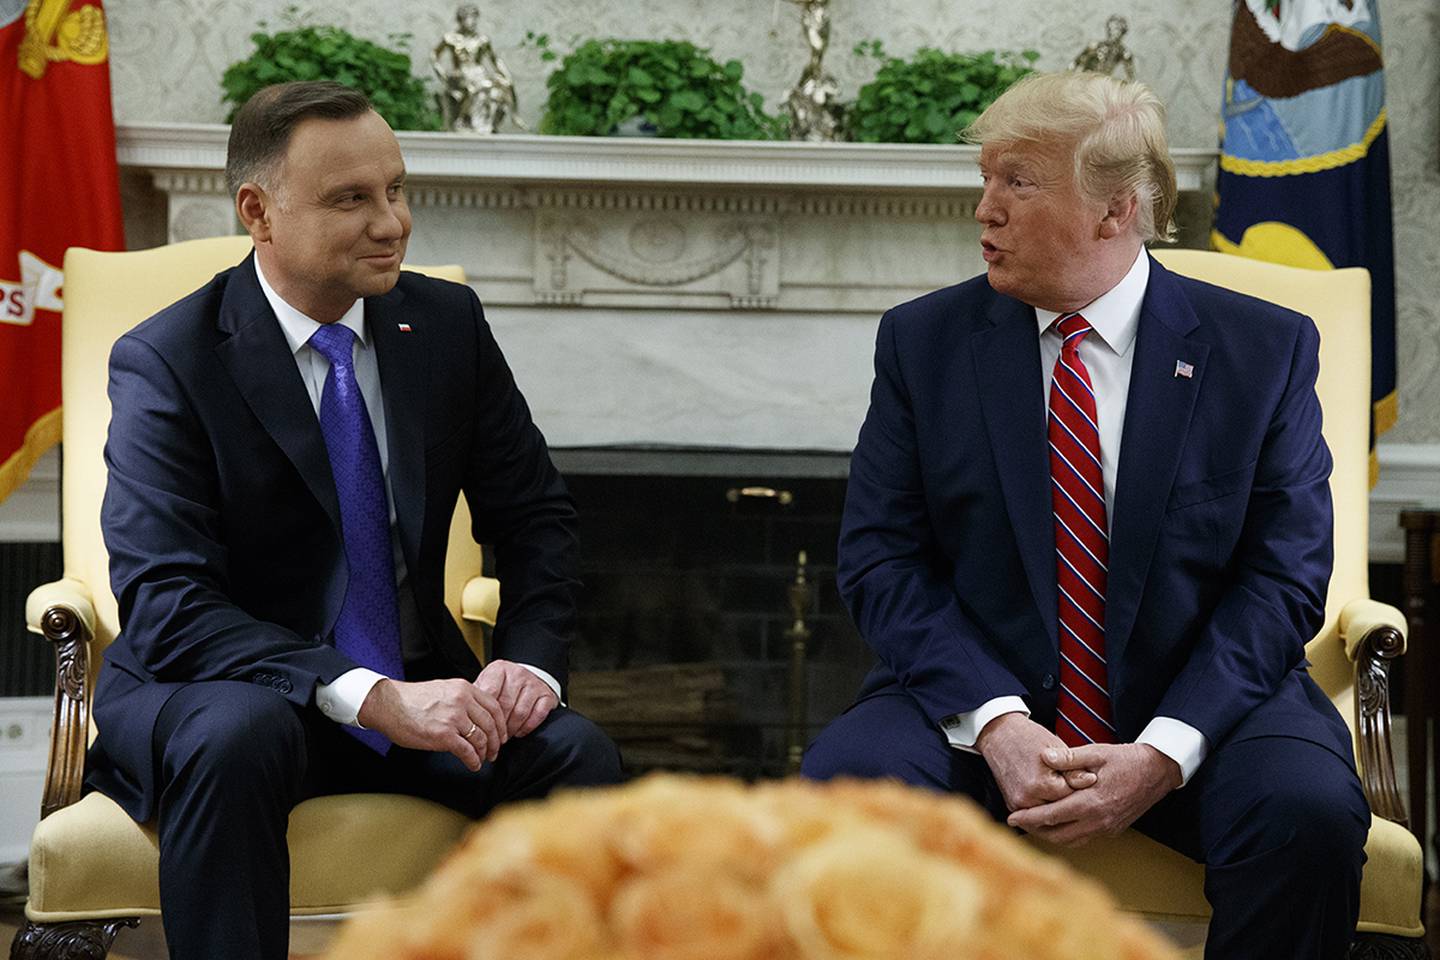 President Donald Trump meets with Polish President Andrzej Duda in the Oval Office of the White House, Wednesday, June 12, 2019, in Washington.